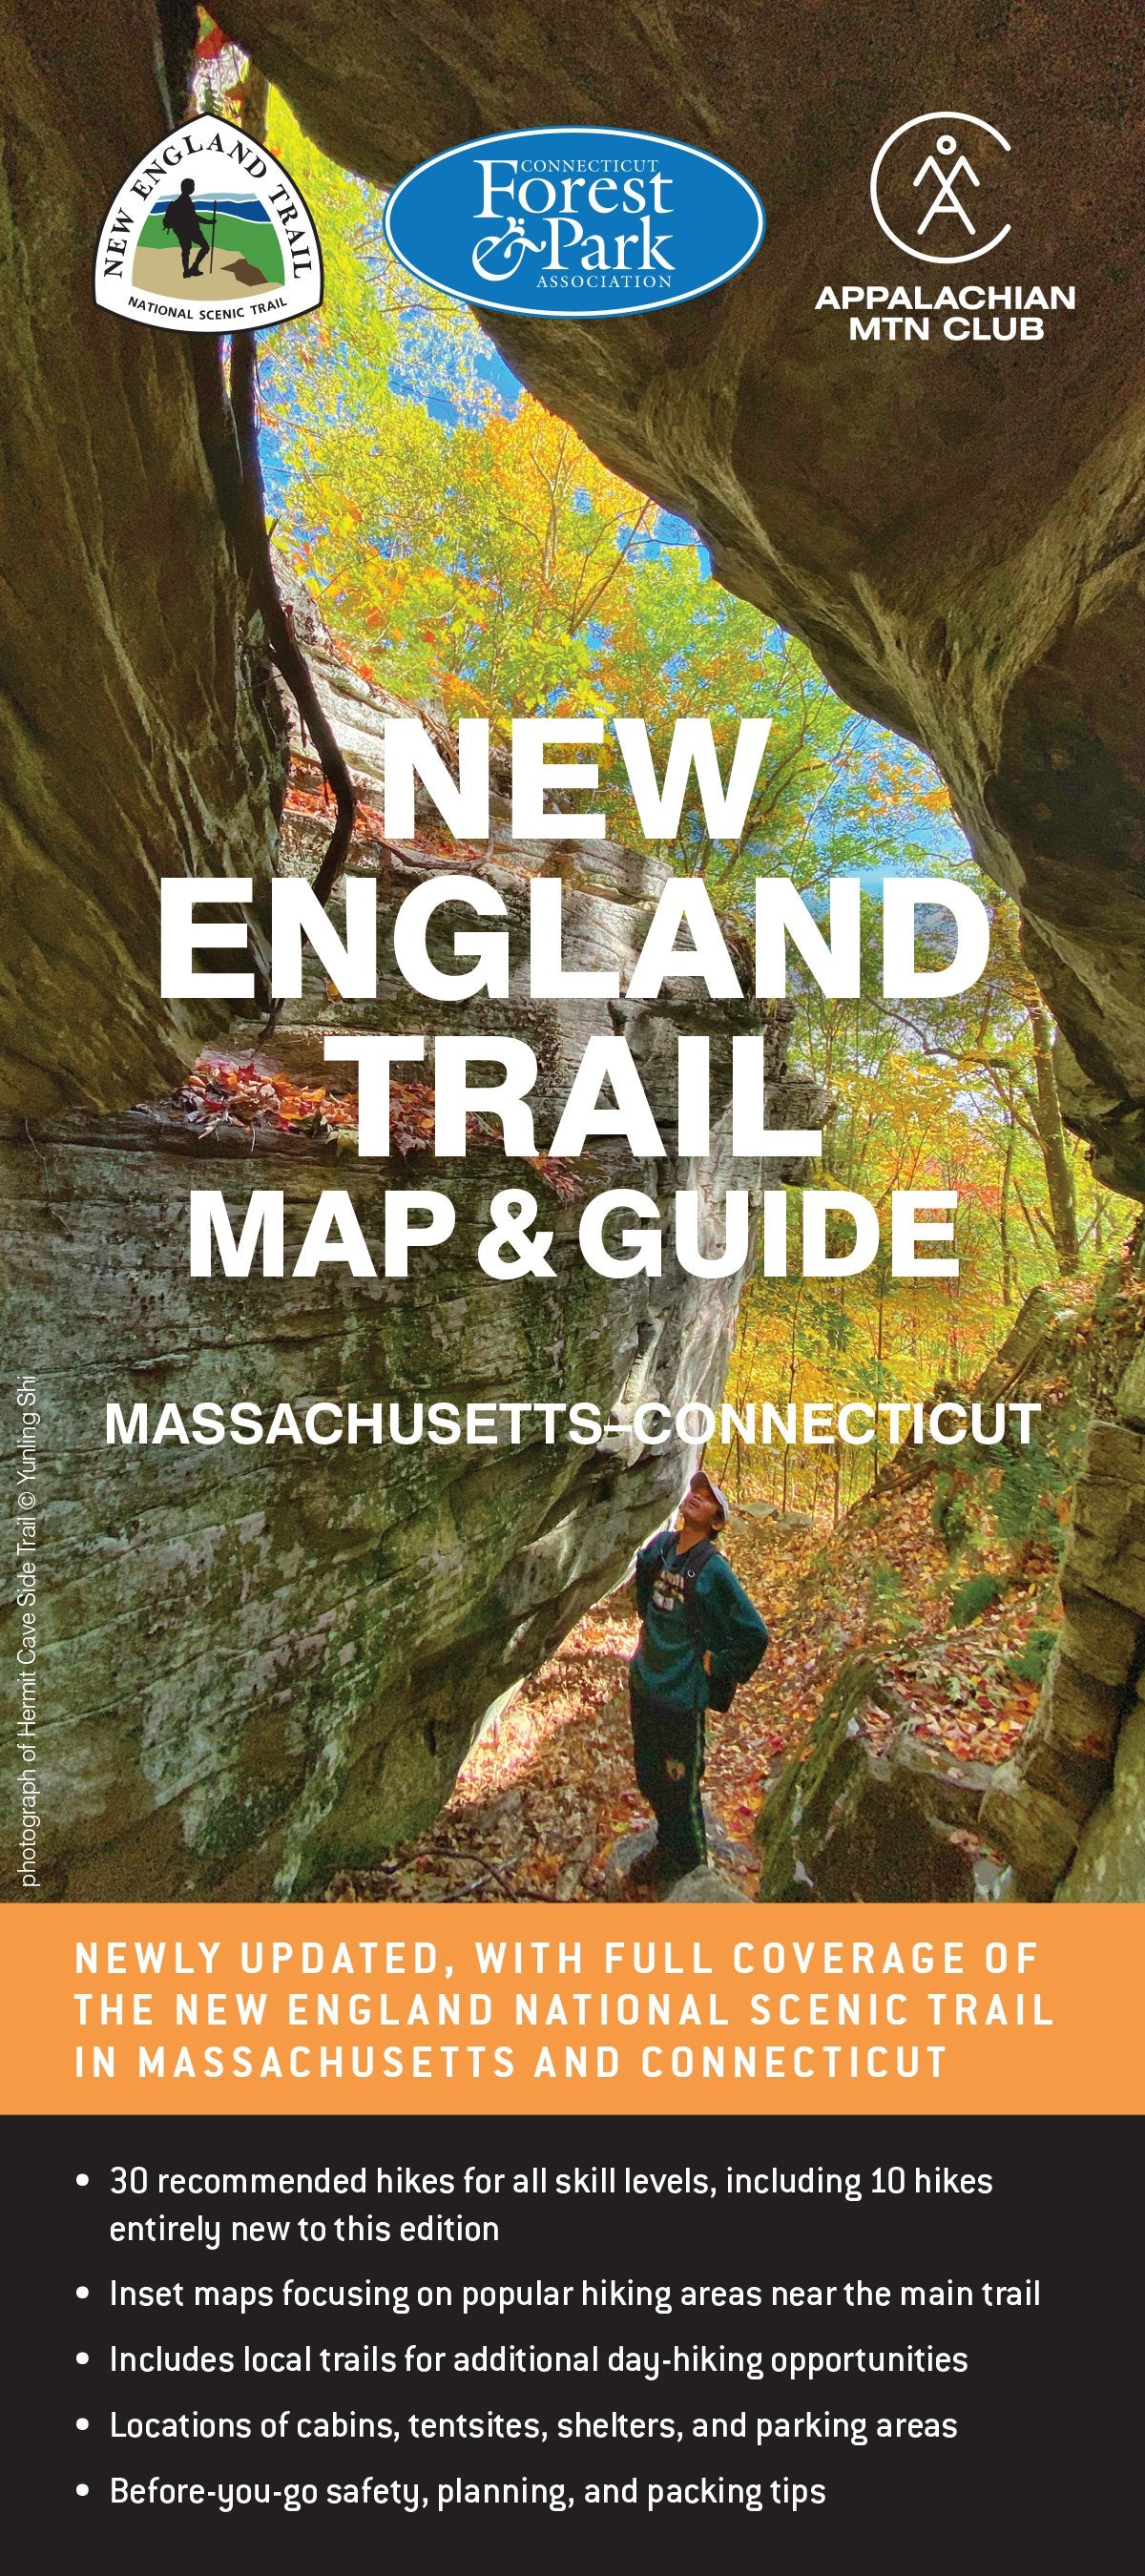 New England Trail Map & Guide, 2nd Edition